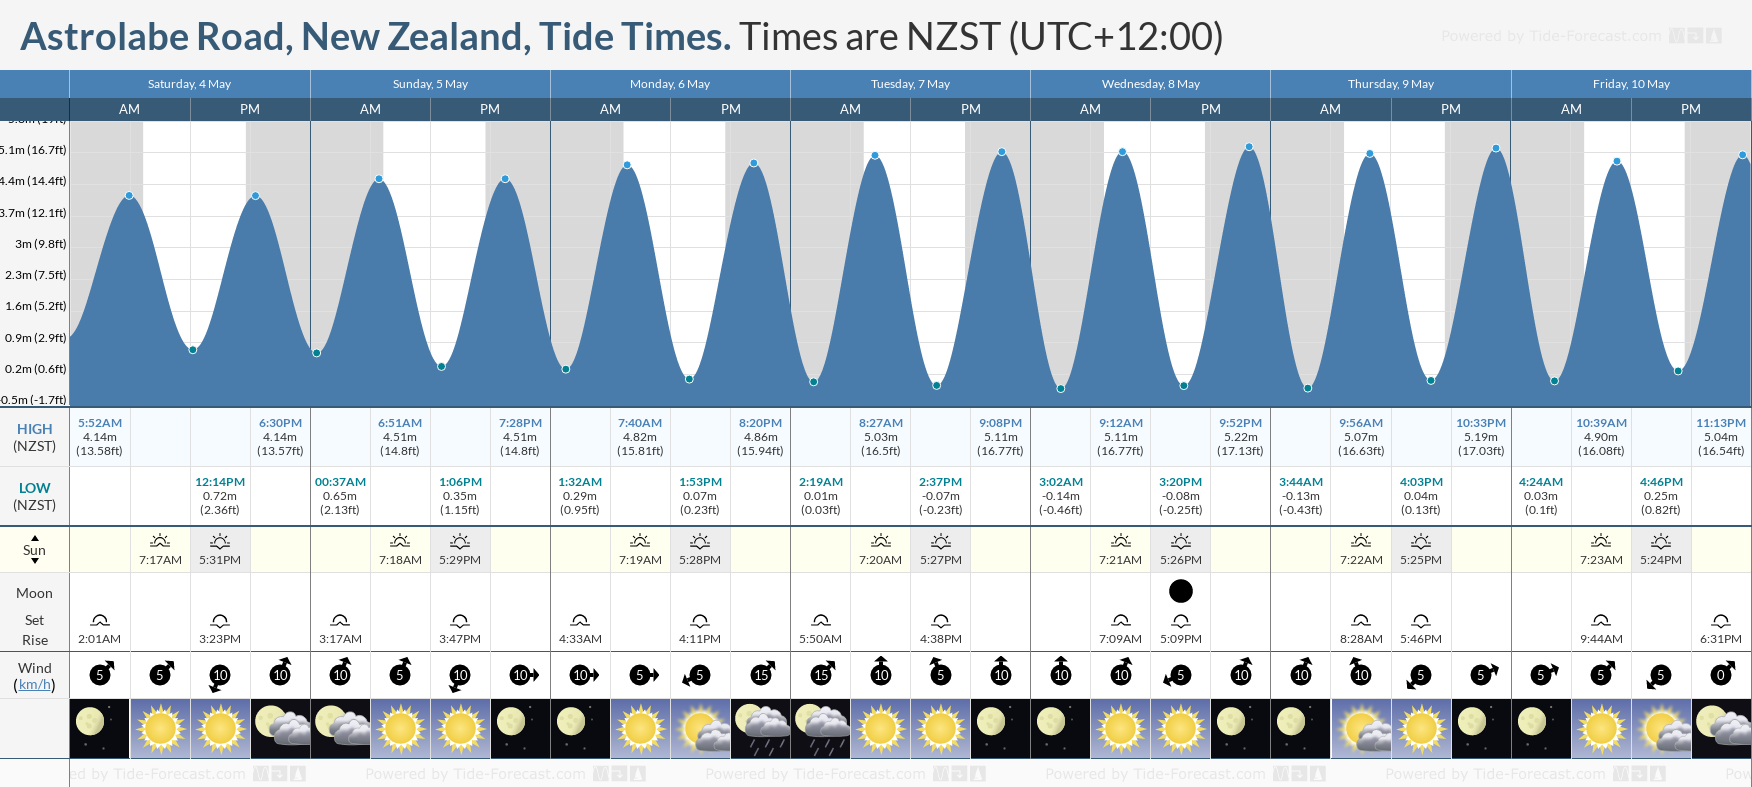 Astrolabe Road, New Zealand Tide Chart including high and low tide tide times for the next 7 days